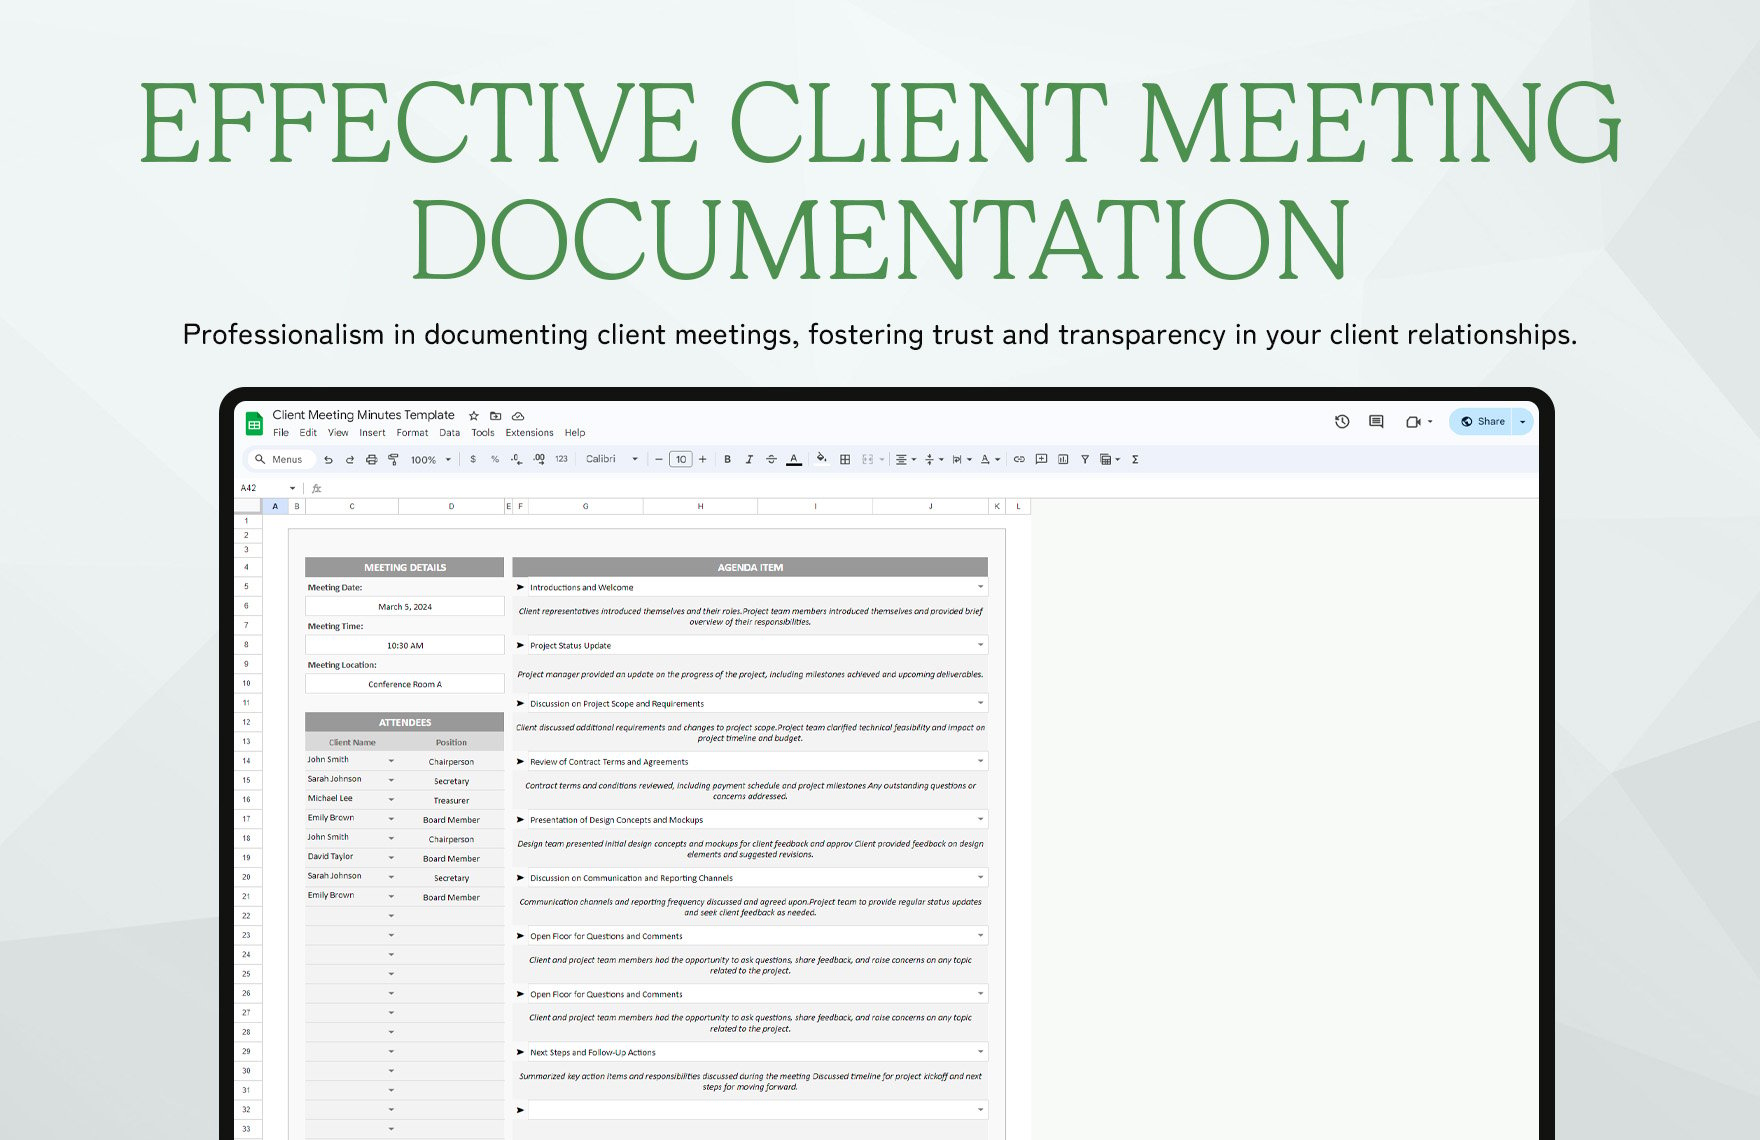 Client Meeting Minutes Template